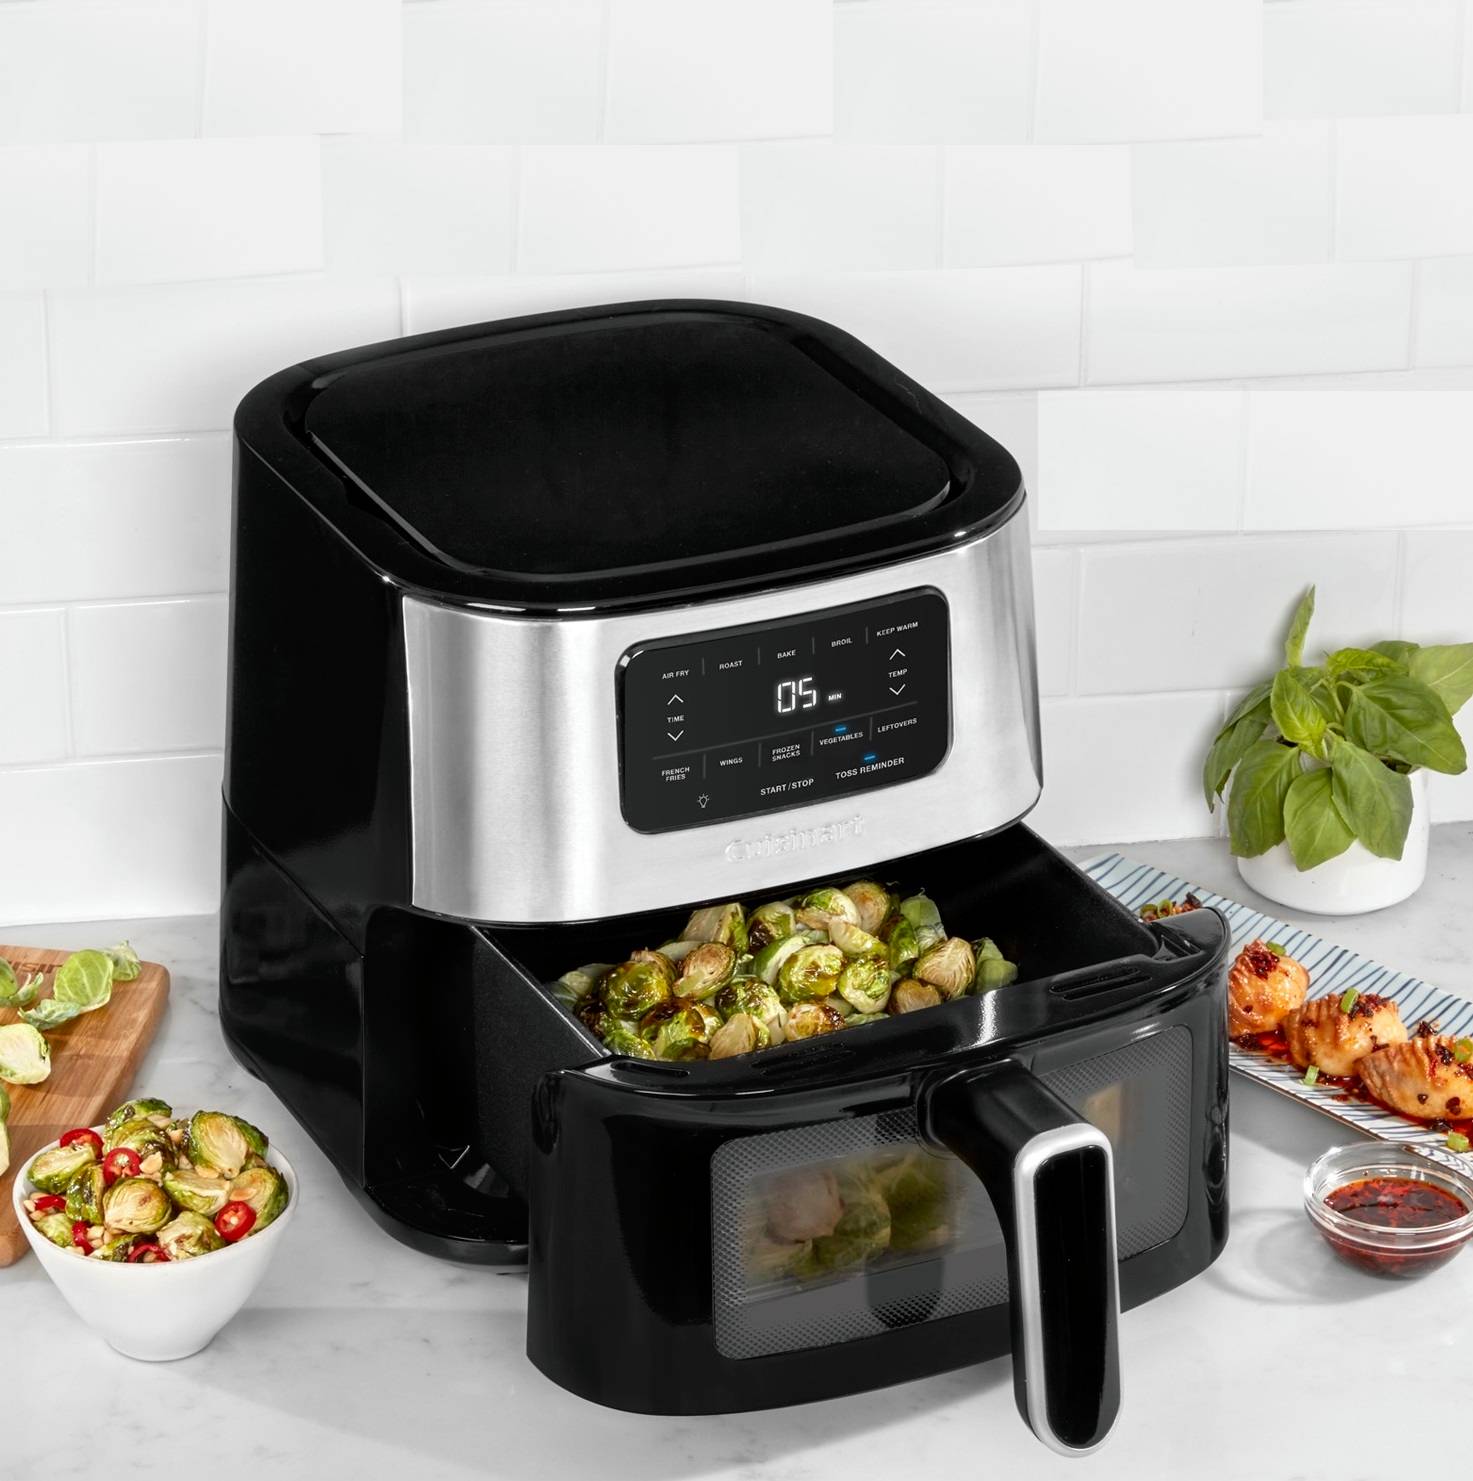 Cook Like a Pro with the Cuisinart Black Basket Airfryer!